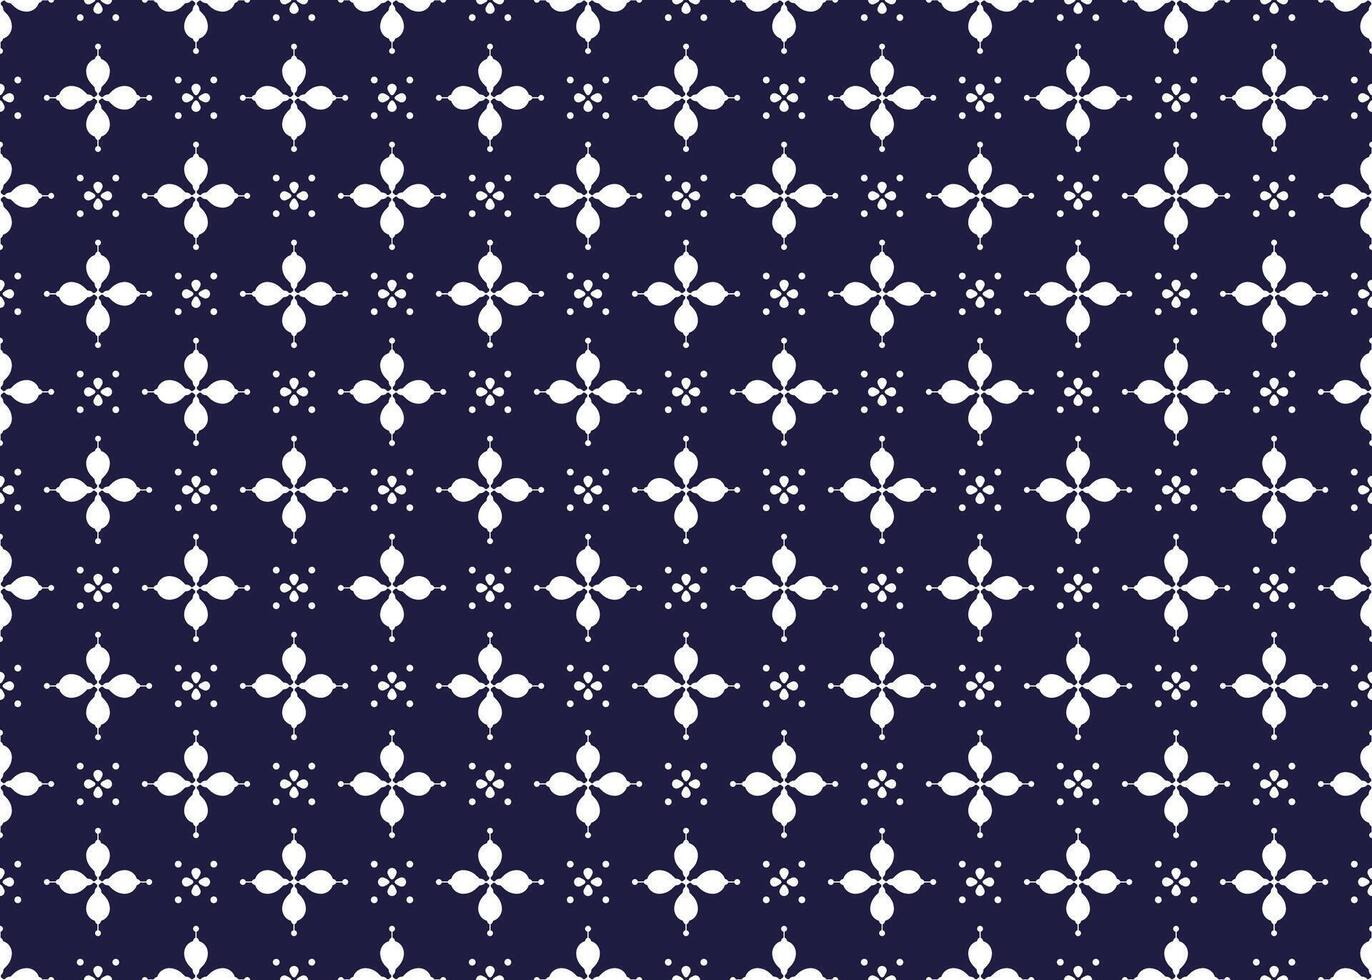 White symbol flowers form on dark blue background, ethnic fabric seamless pattern design for cloth, carpet, batik, wallpaper, wrapping etc. vector